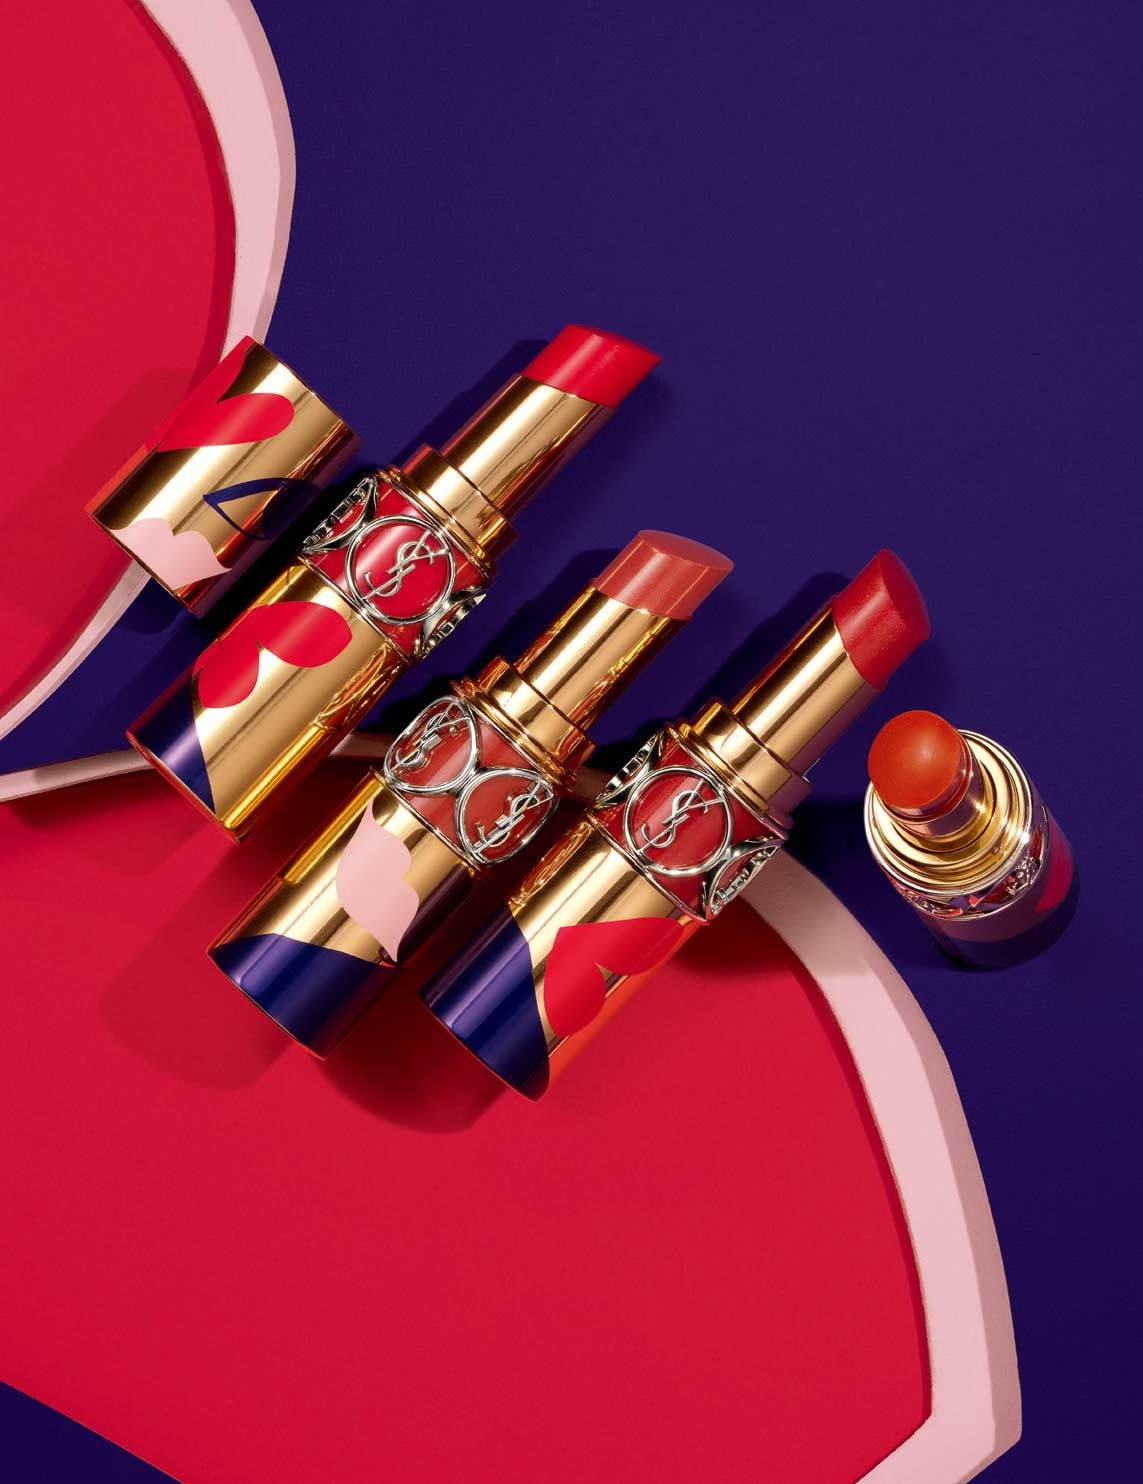 YSL I LOVE YOU SO POP SUMMER 2020 COLLECTION INSPIRED BY POP ART 2 - YSL I LOVE YOU SO POP SUMMER 2020 COLLECTION INSPIRED BY POP ART